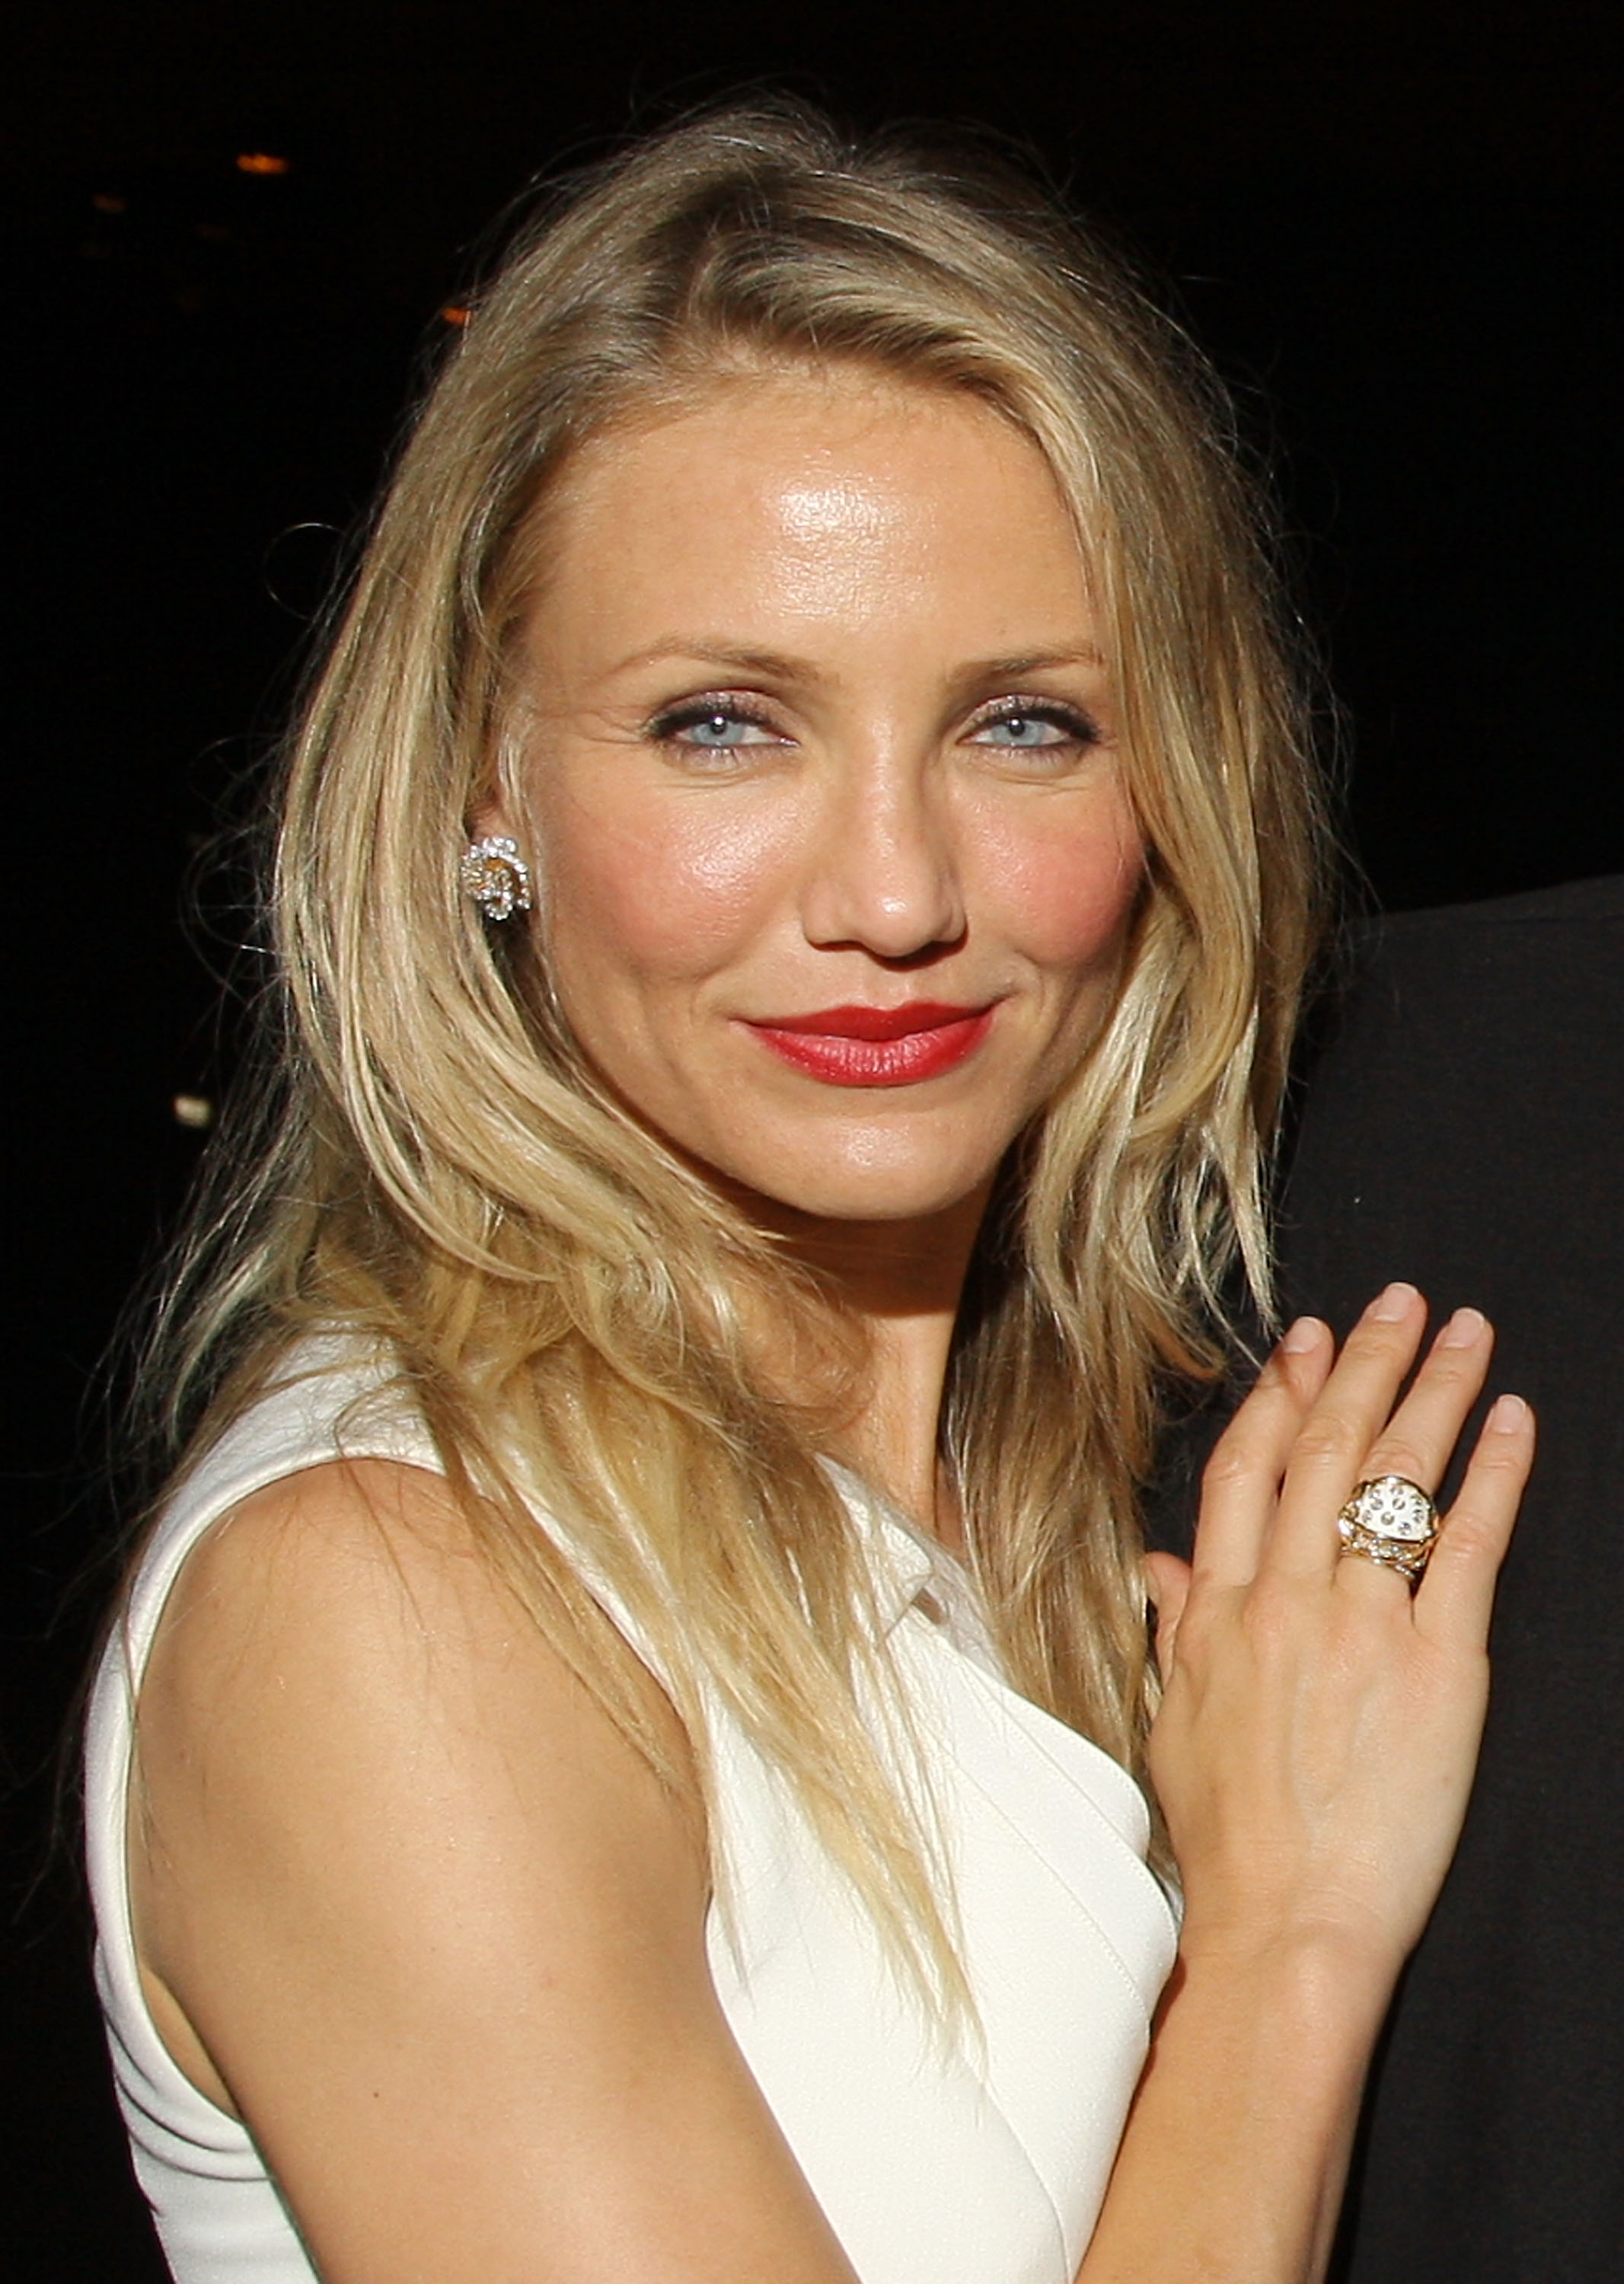 Cameron Diaz attends the after party for the New York premiere of "My Sister's Keeper" on June 24, 2009 in New York City. | Source: Getty Images